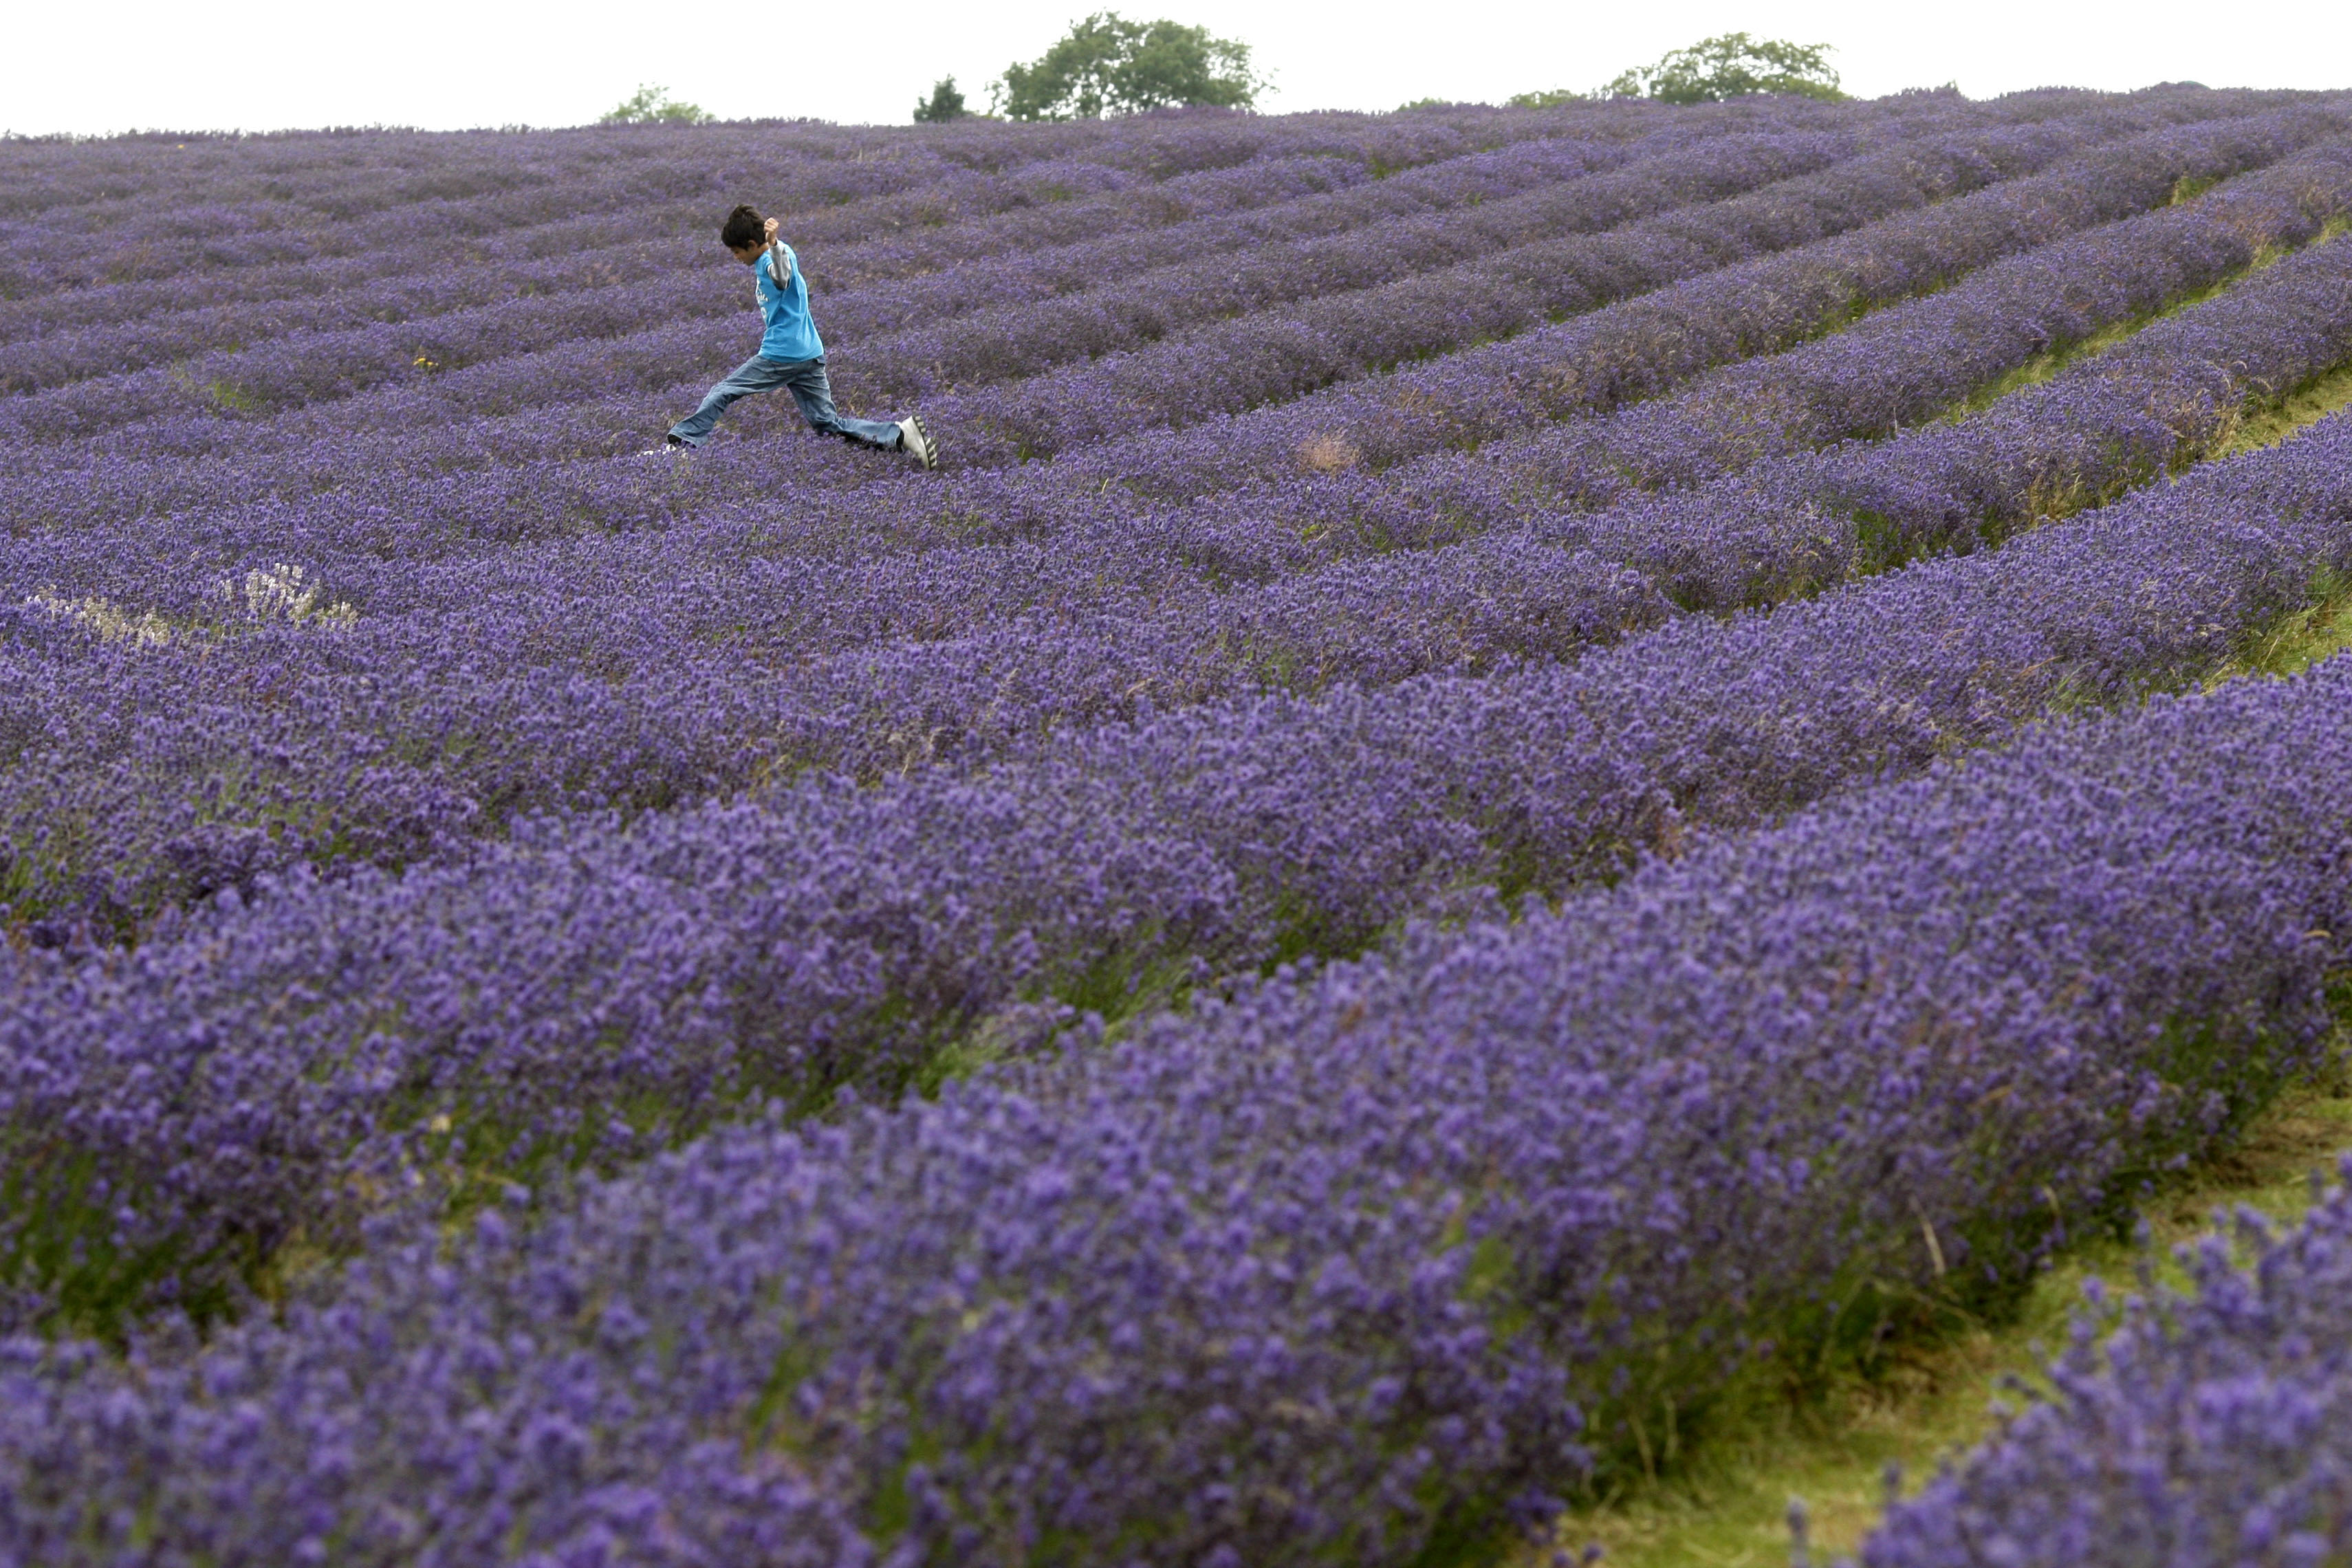 A boy jumps over a row of lavender in a field in Carshalton, south London, Wednesday, July 22, 2009. (AP Photo/Sang Tan)